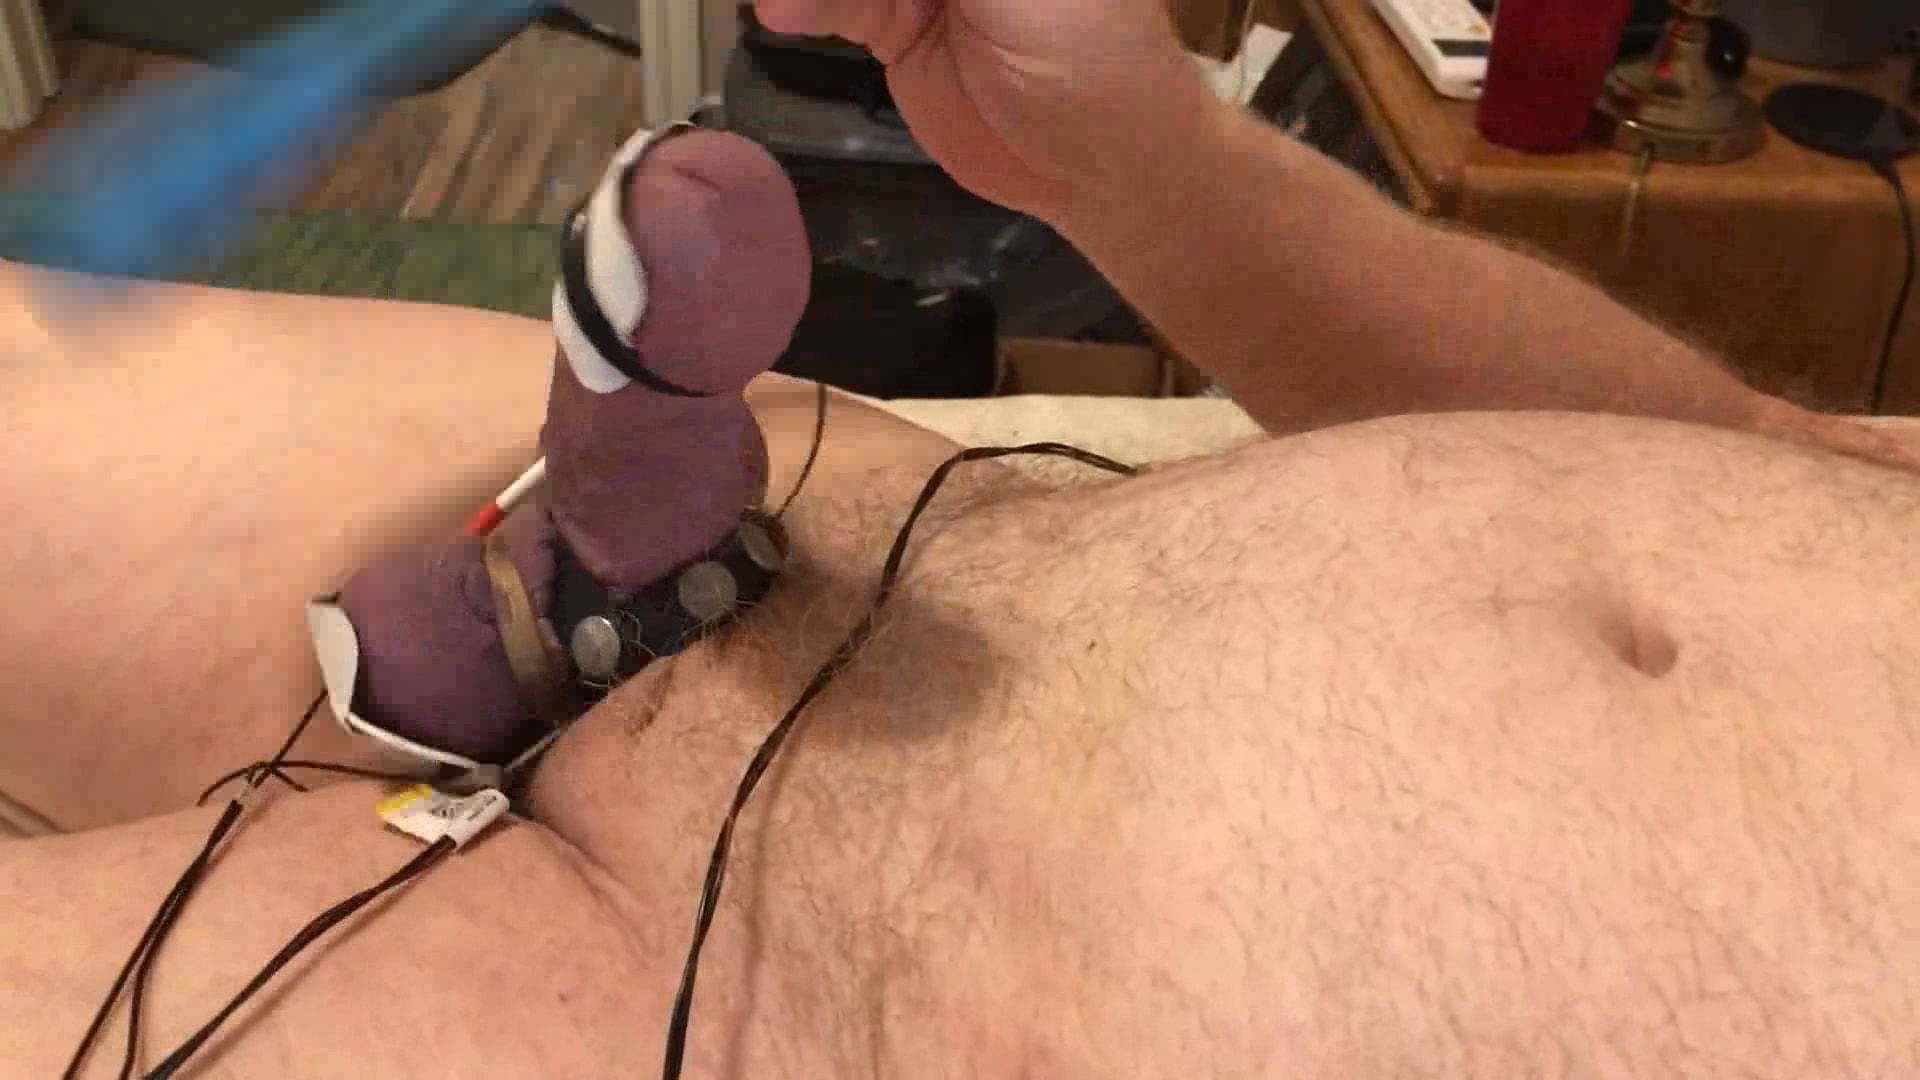 Cock twitches with estim pulse and precum flows as I slap an #45